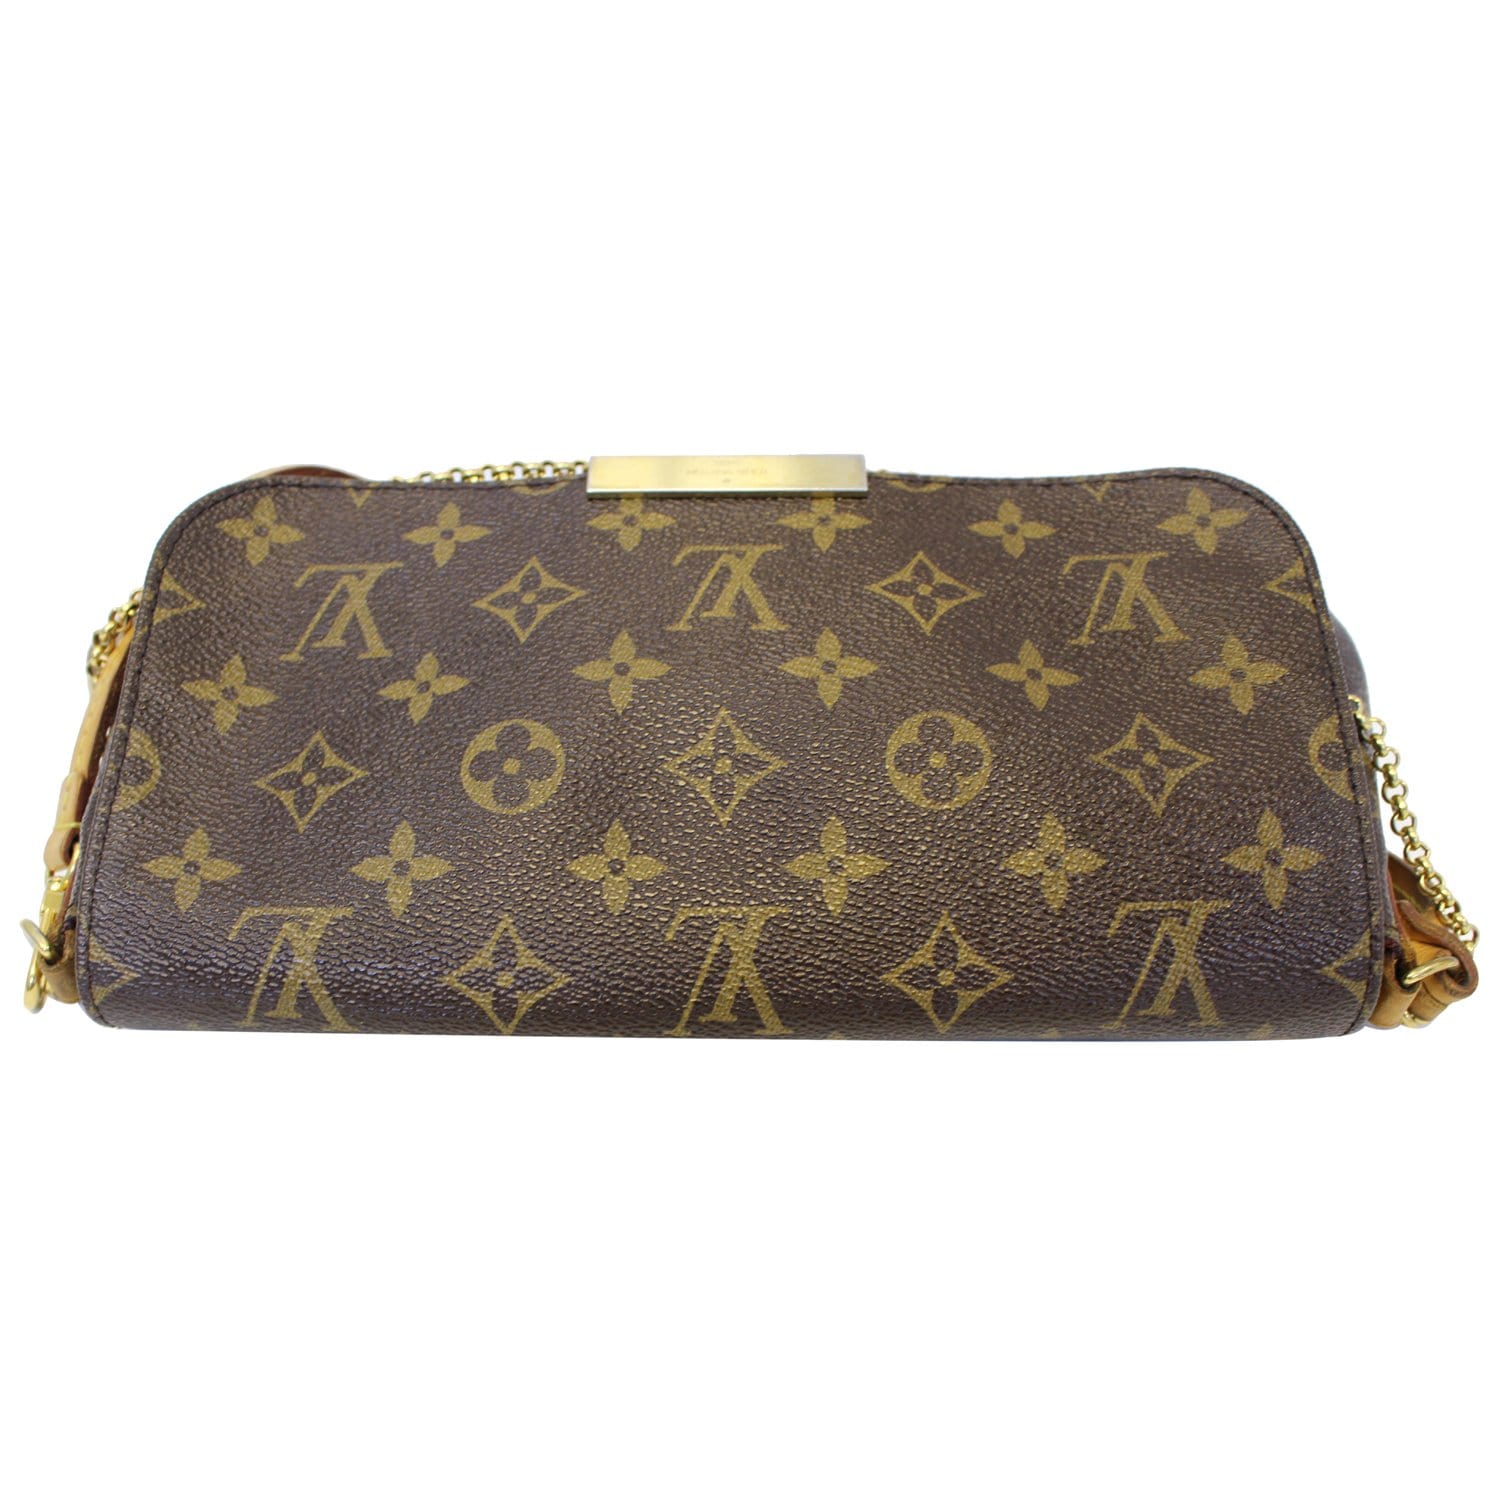 Louis Vuitton Brown/Burgundy Canvas and Patent Leather D'orsay